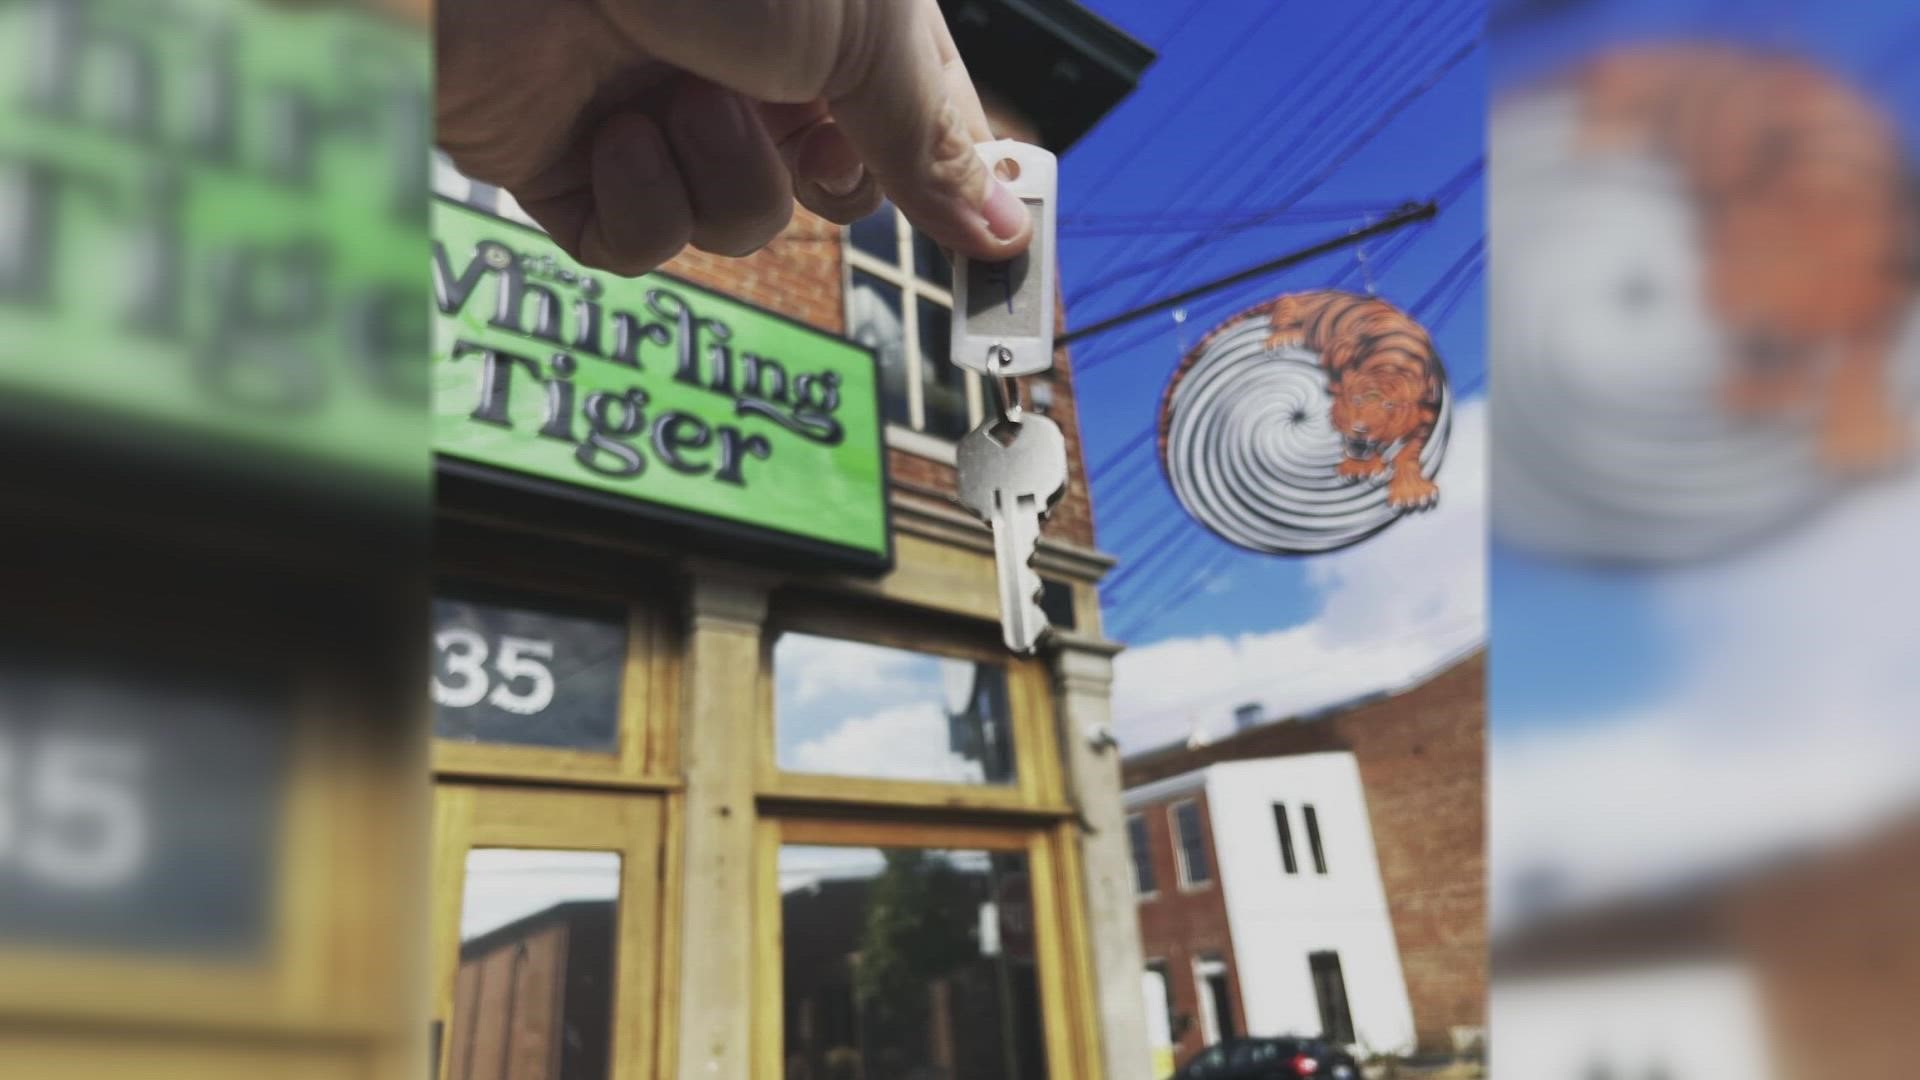 The Whirling Tiger in Butchertown is reopening thanks to new ownership.